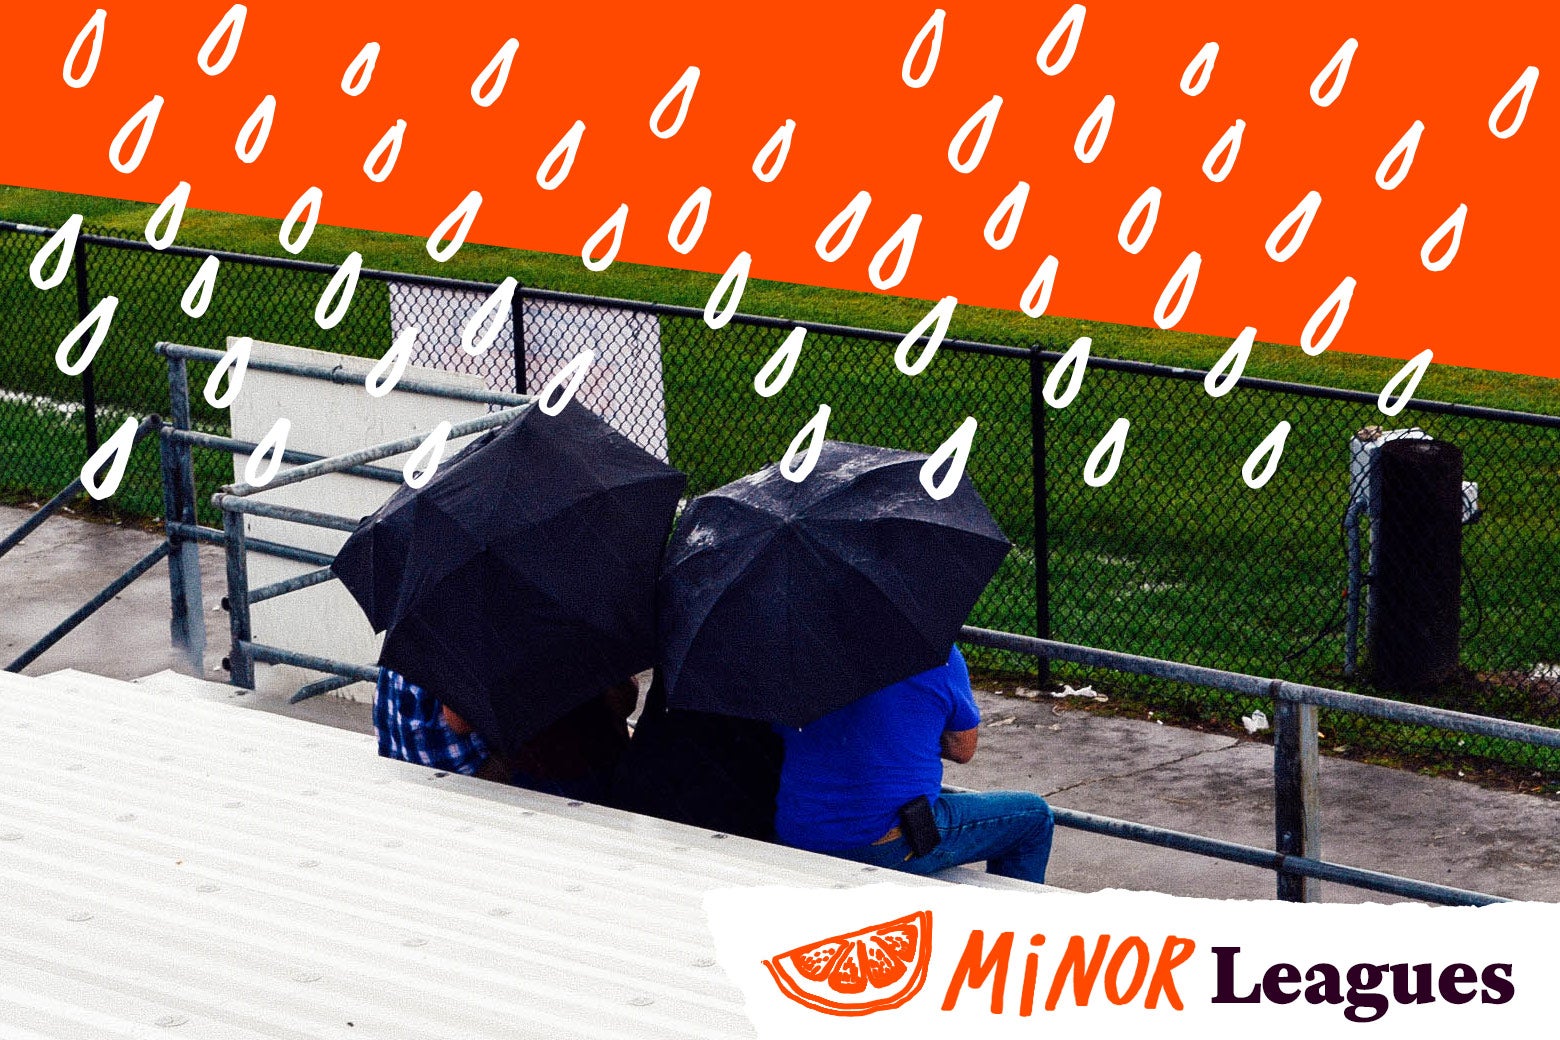 Parents sitting in the rain watching youth sports.